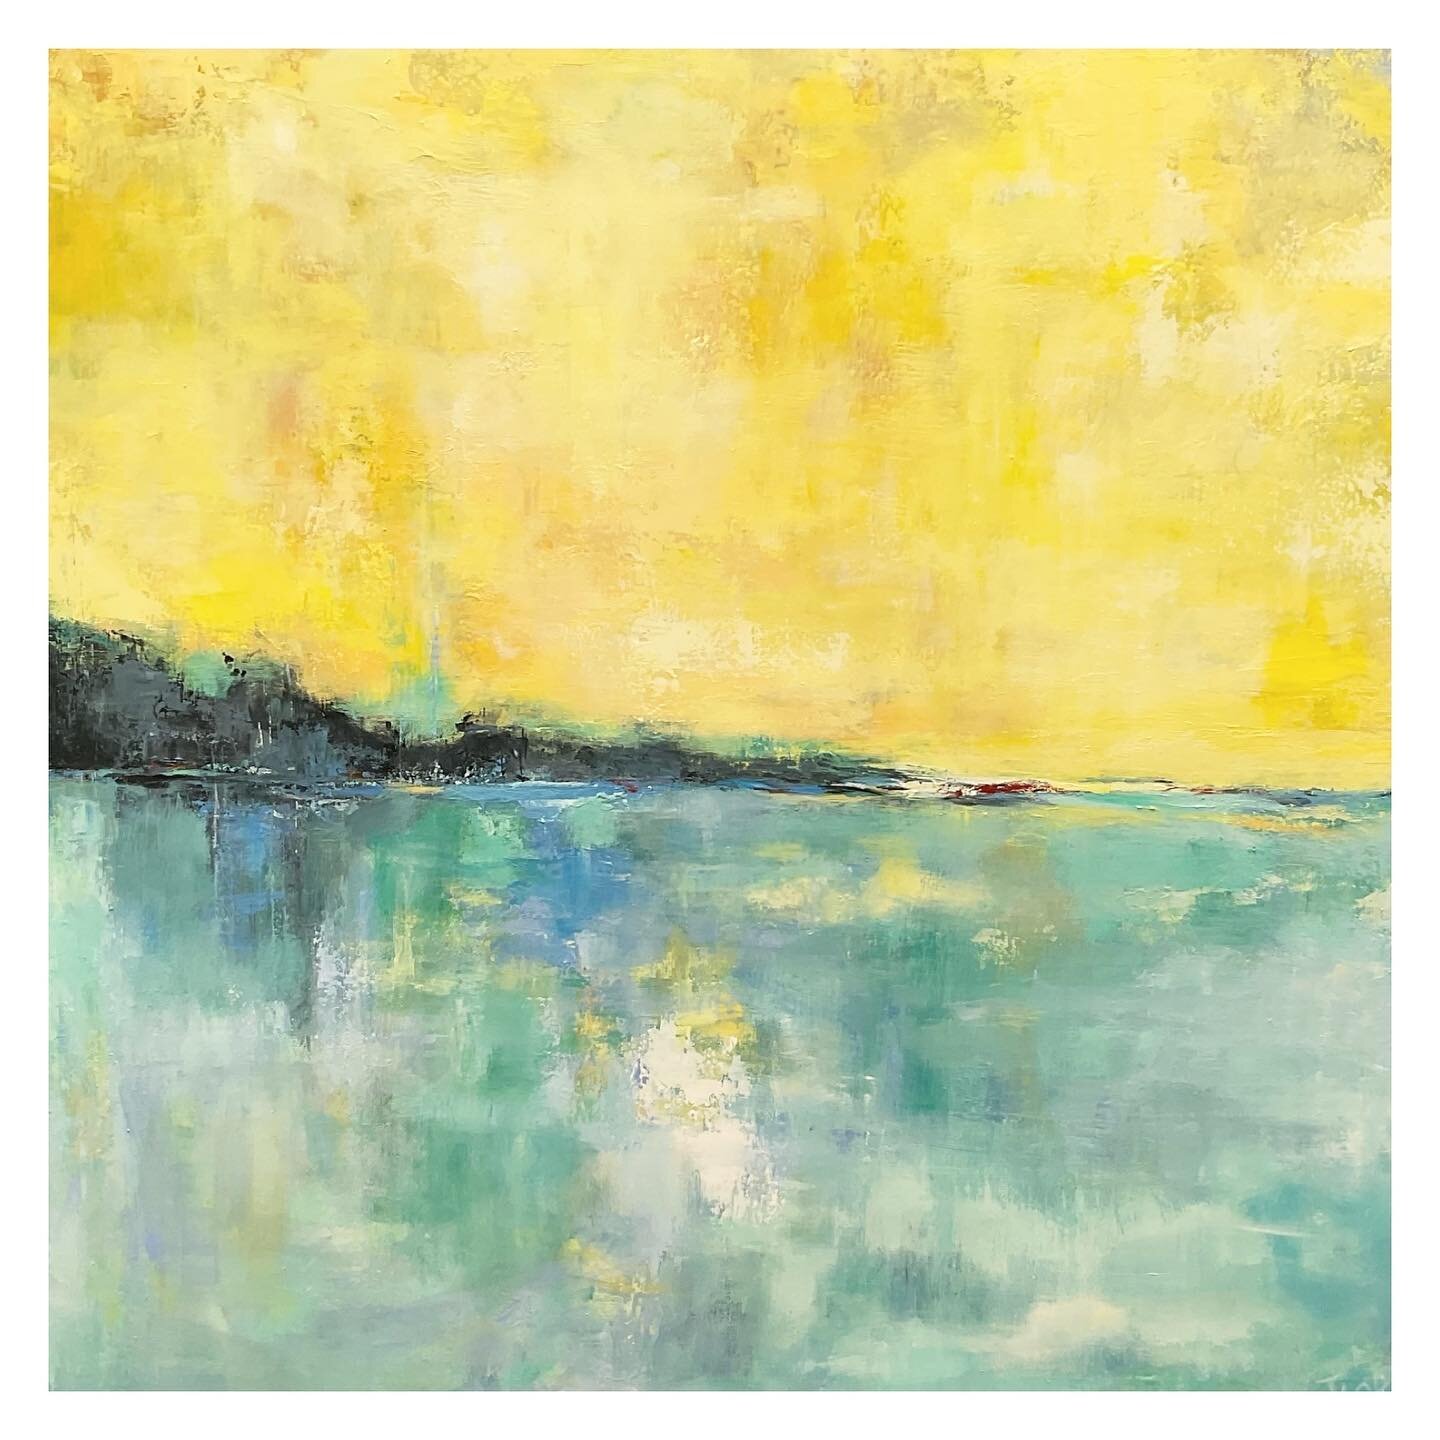 This is a large version of a previous painting I did. Today, I delivered it to it&rsquo;s new home in Sitges.
It&rsquo;s quite difficult to replicate an abstract painting that has so many layers! 
The 50x50cm small version of this is still available 